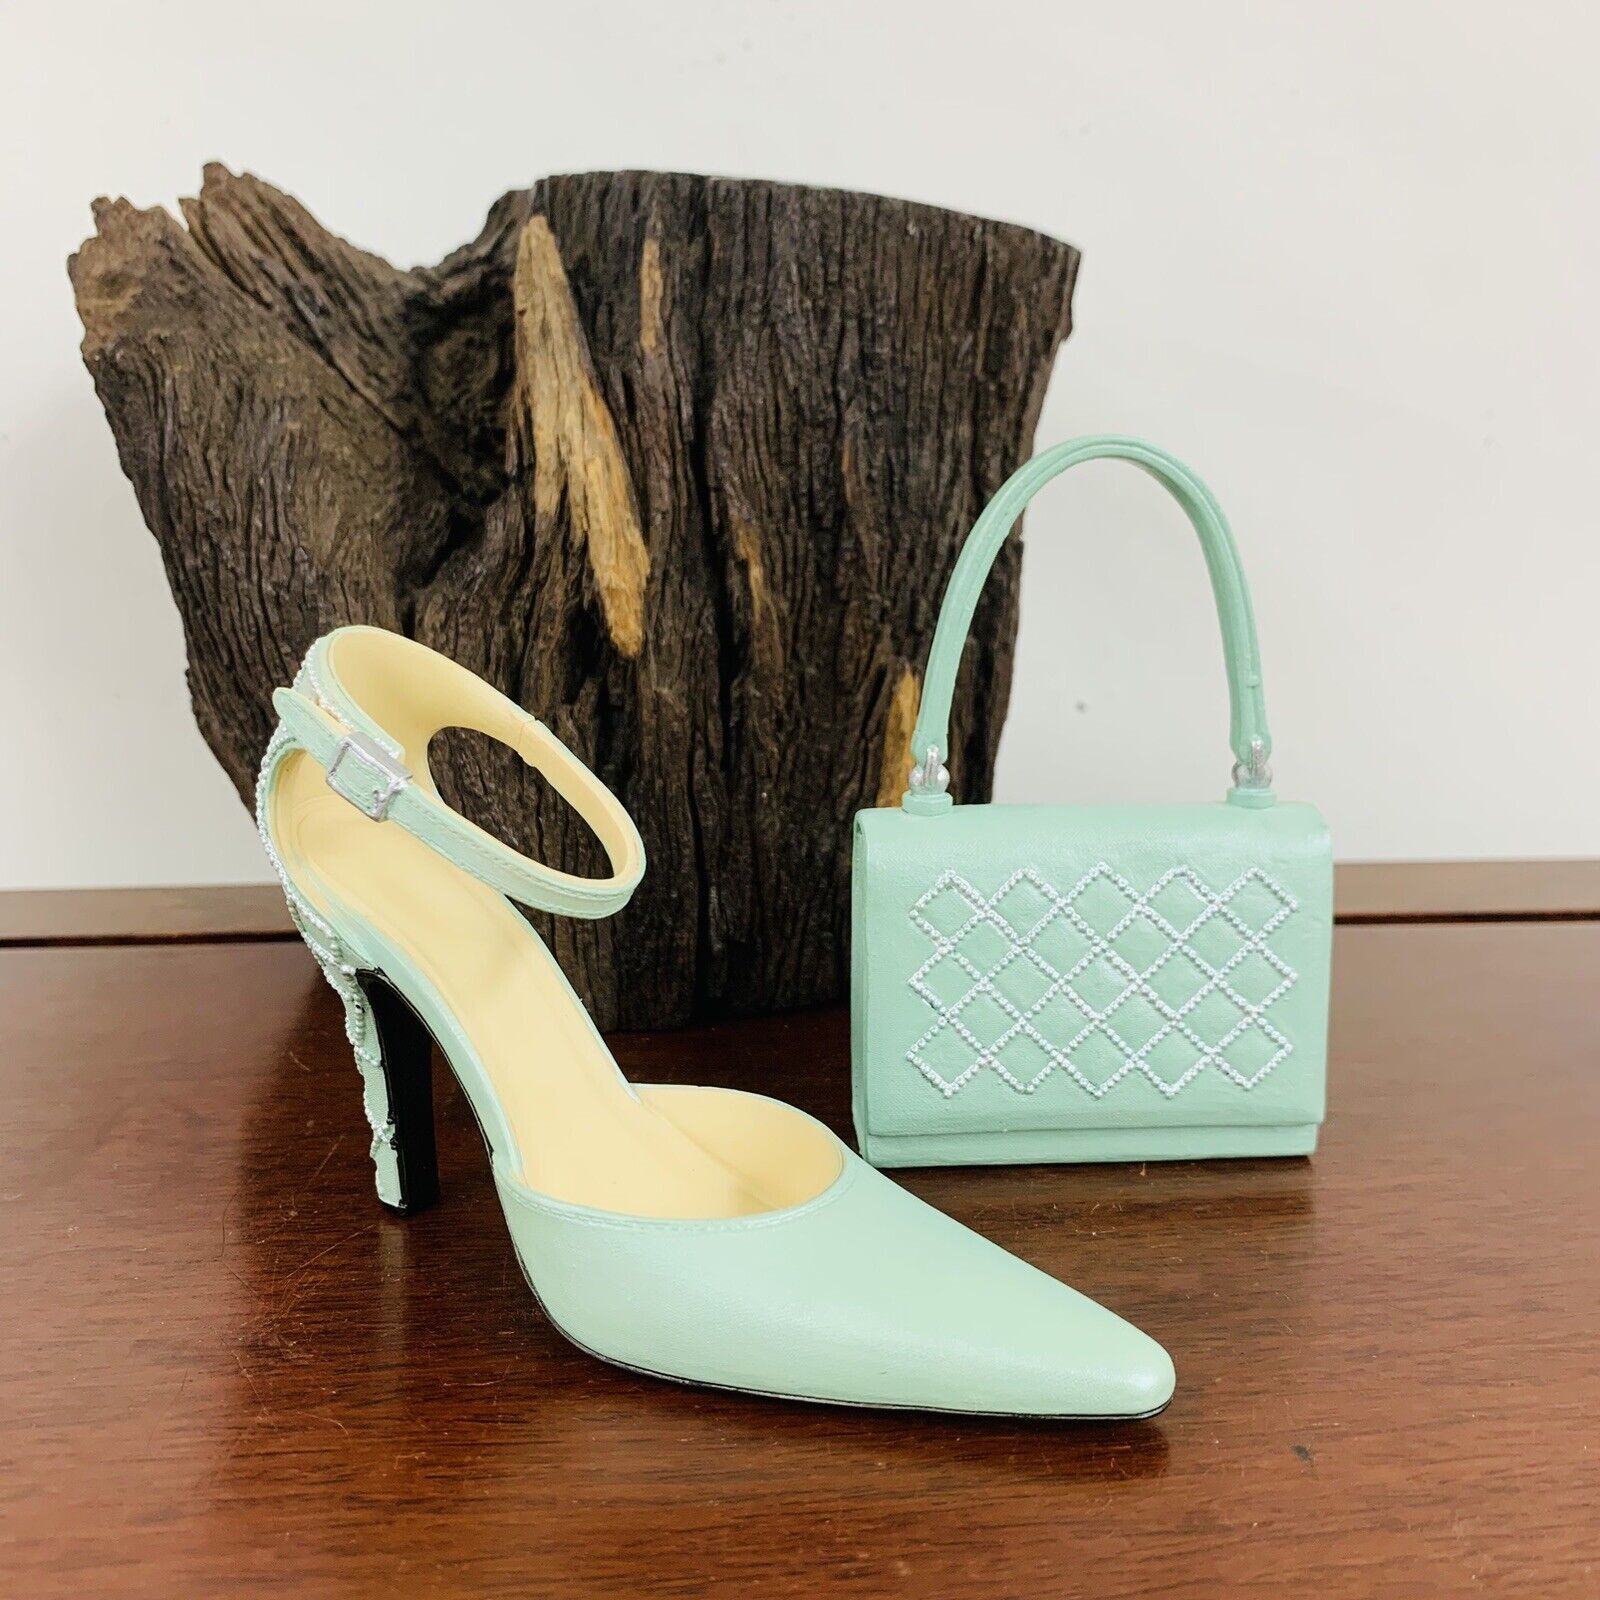 Classic Couture “The Aminta” Third Edition Shoe And Handbag